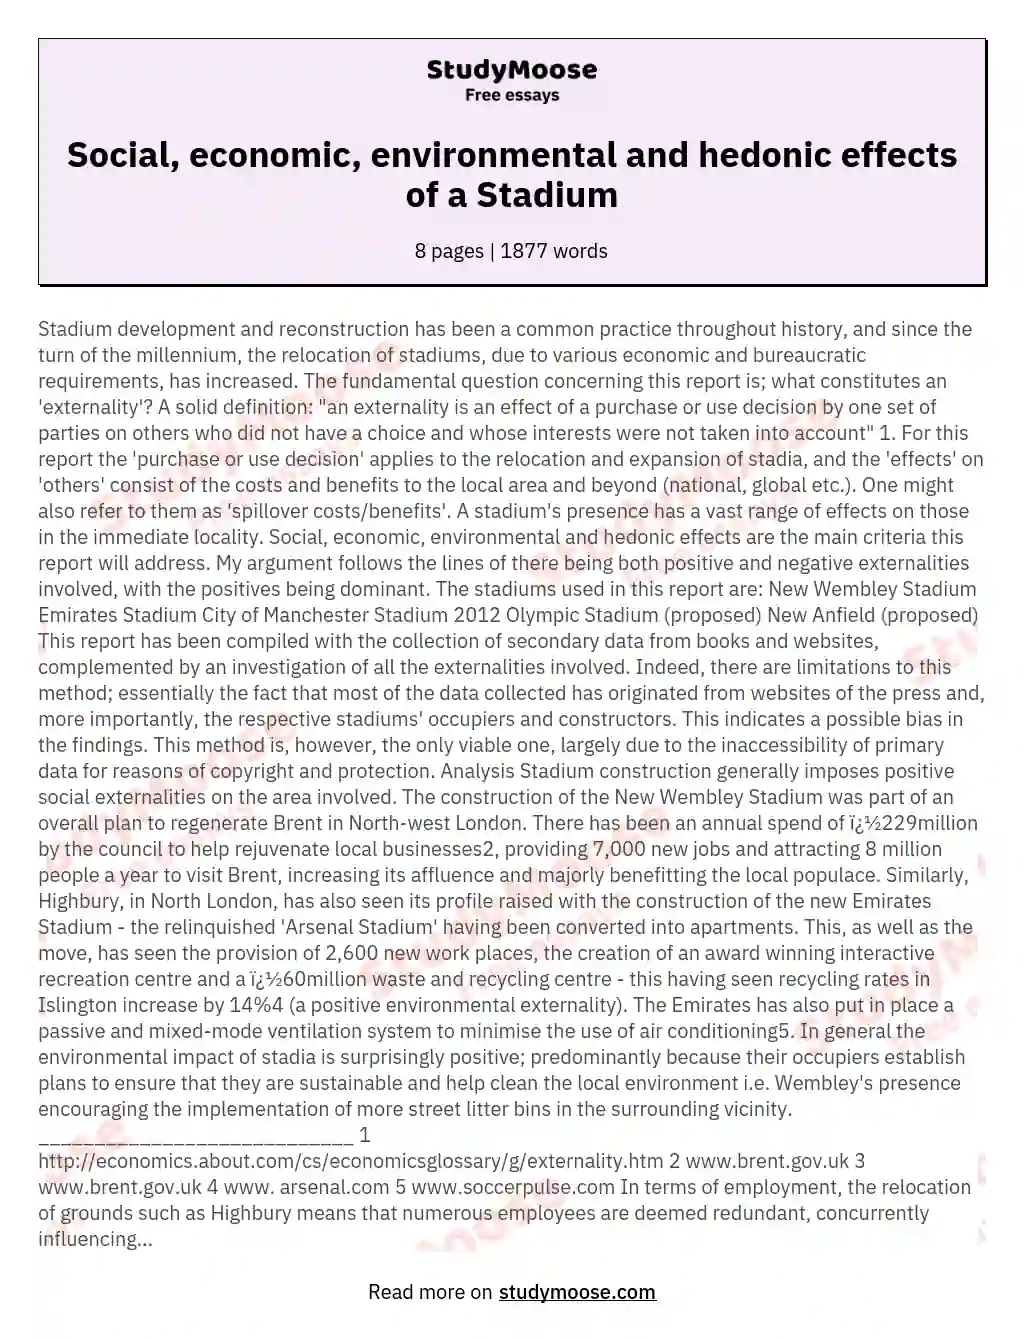 Social, economic, environmental and hedonic effects of a Stadium essay